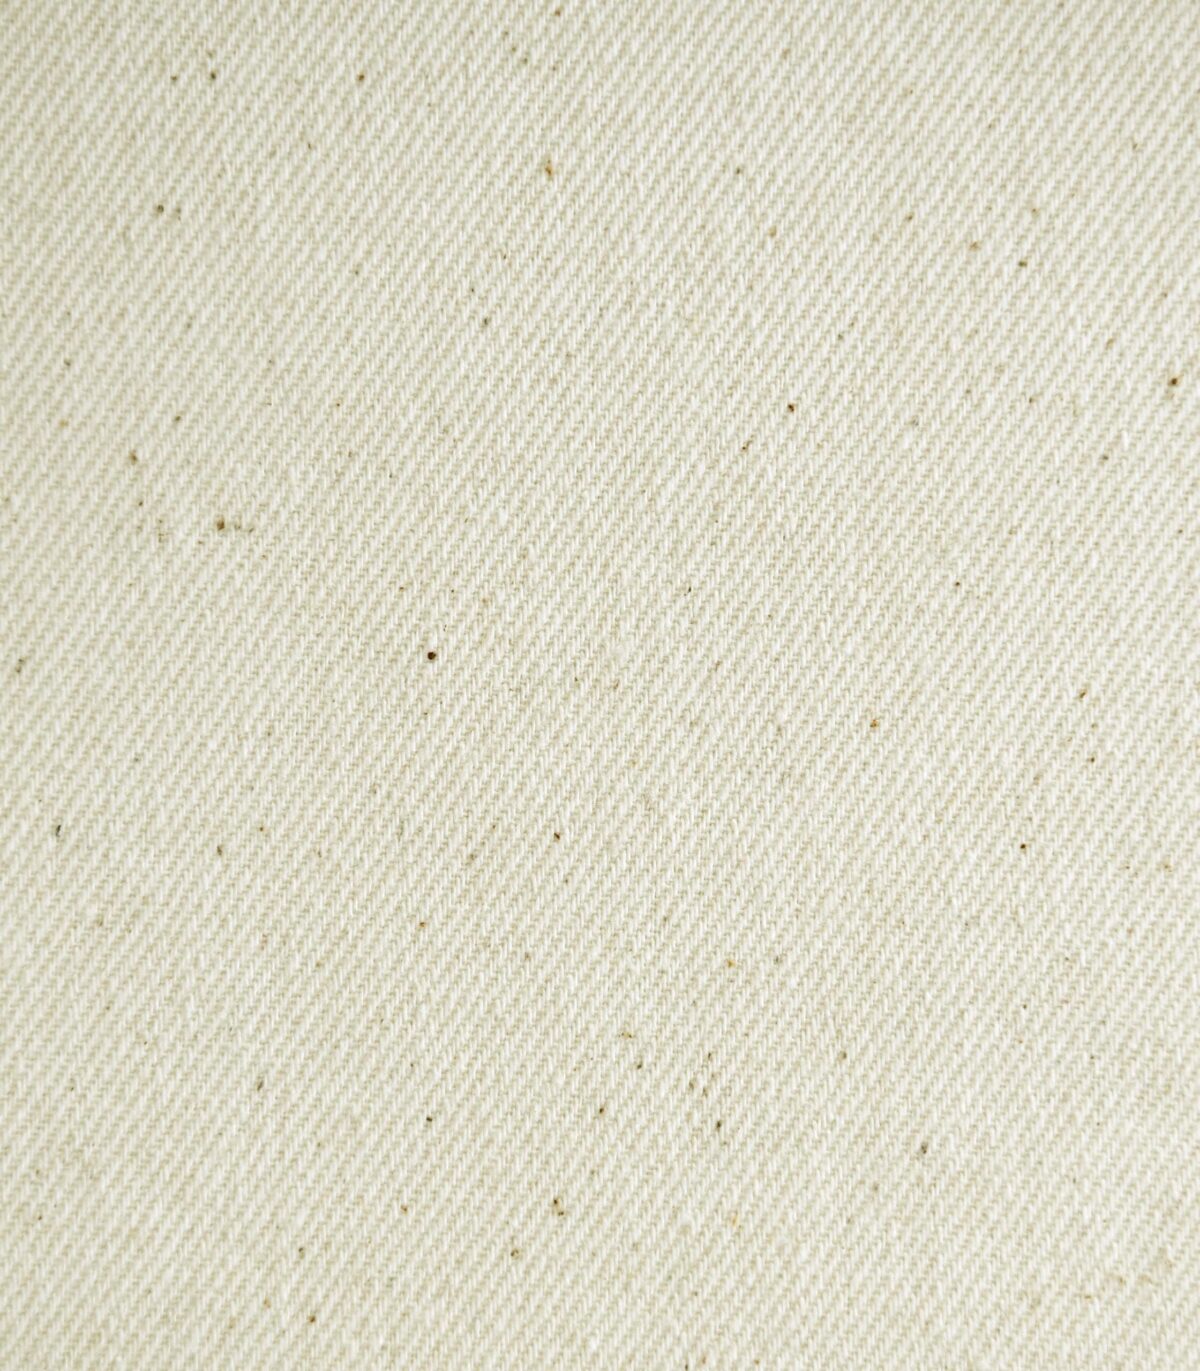 Cotton Natural Dyed Twill Woven Fabric